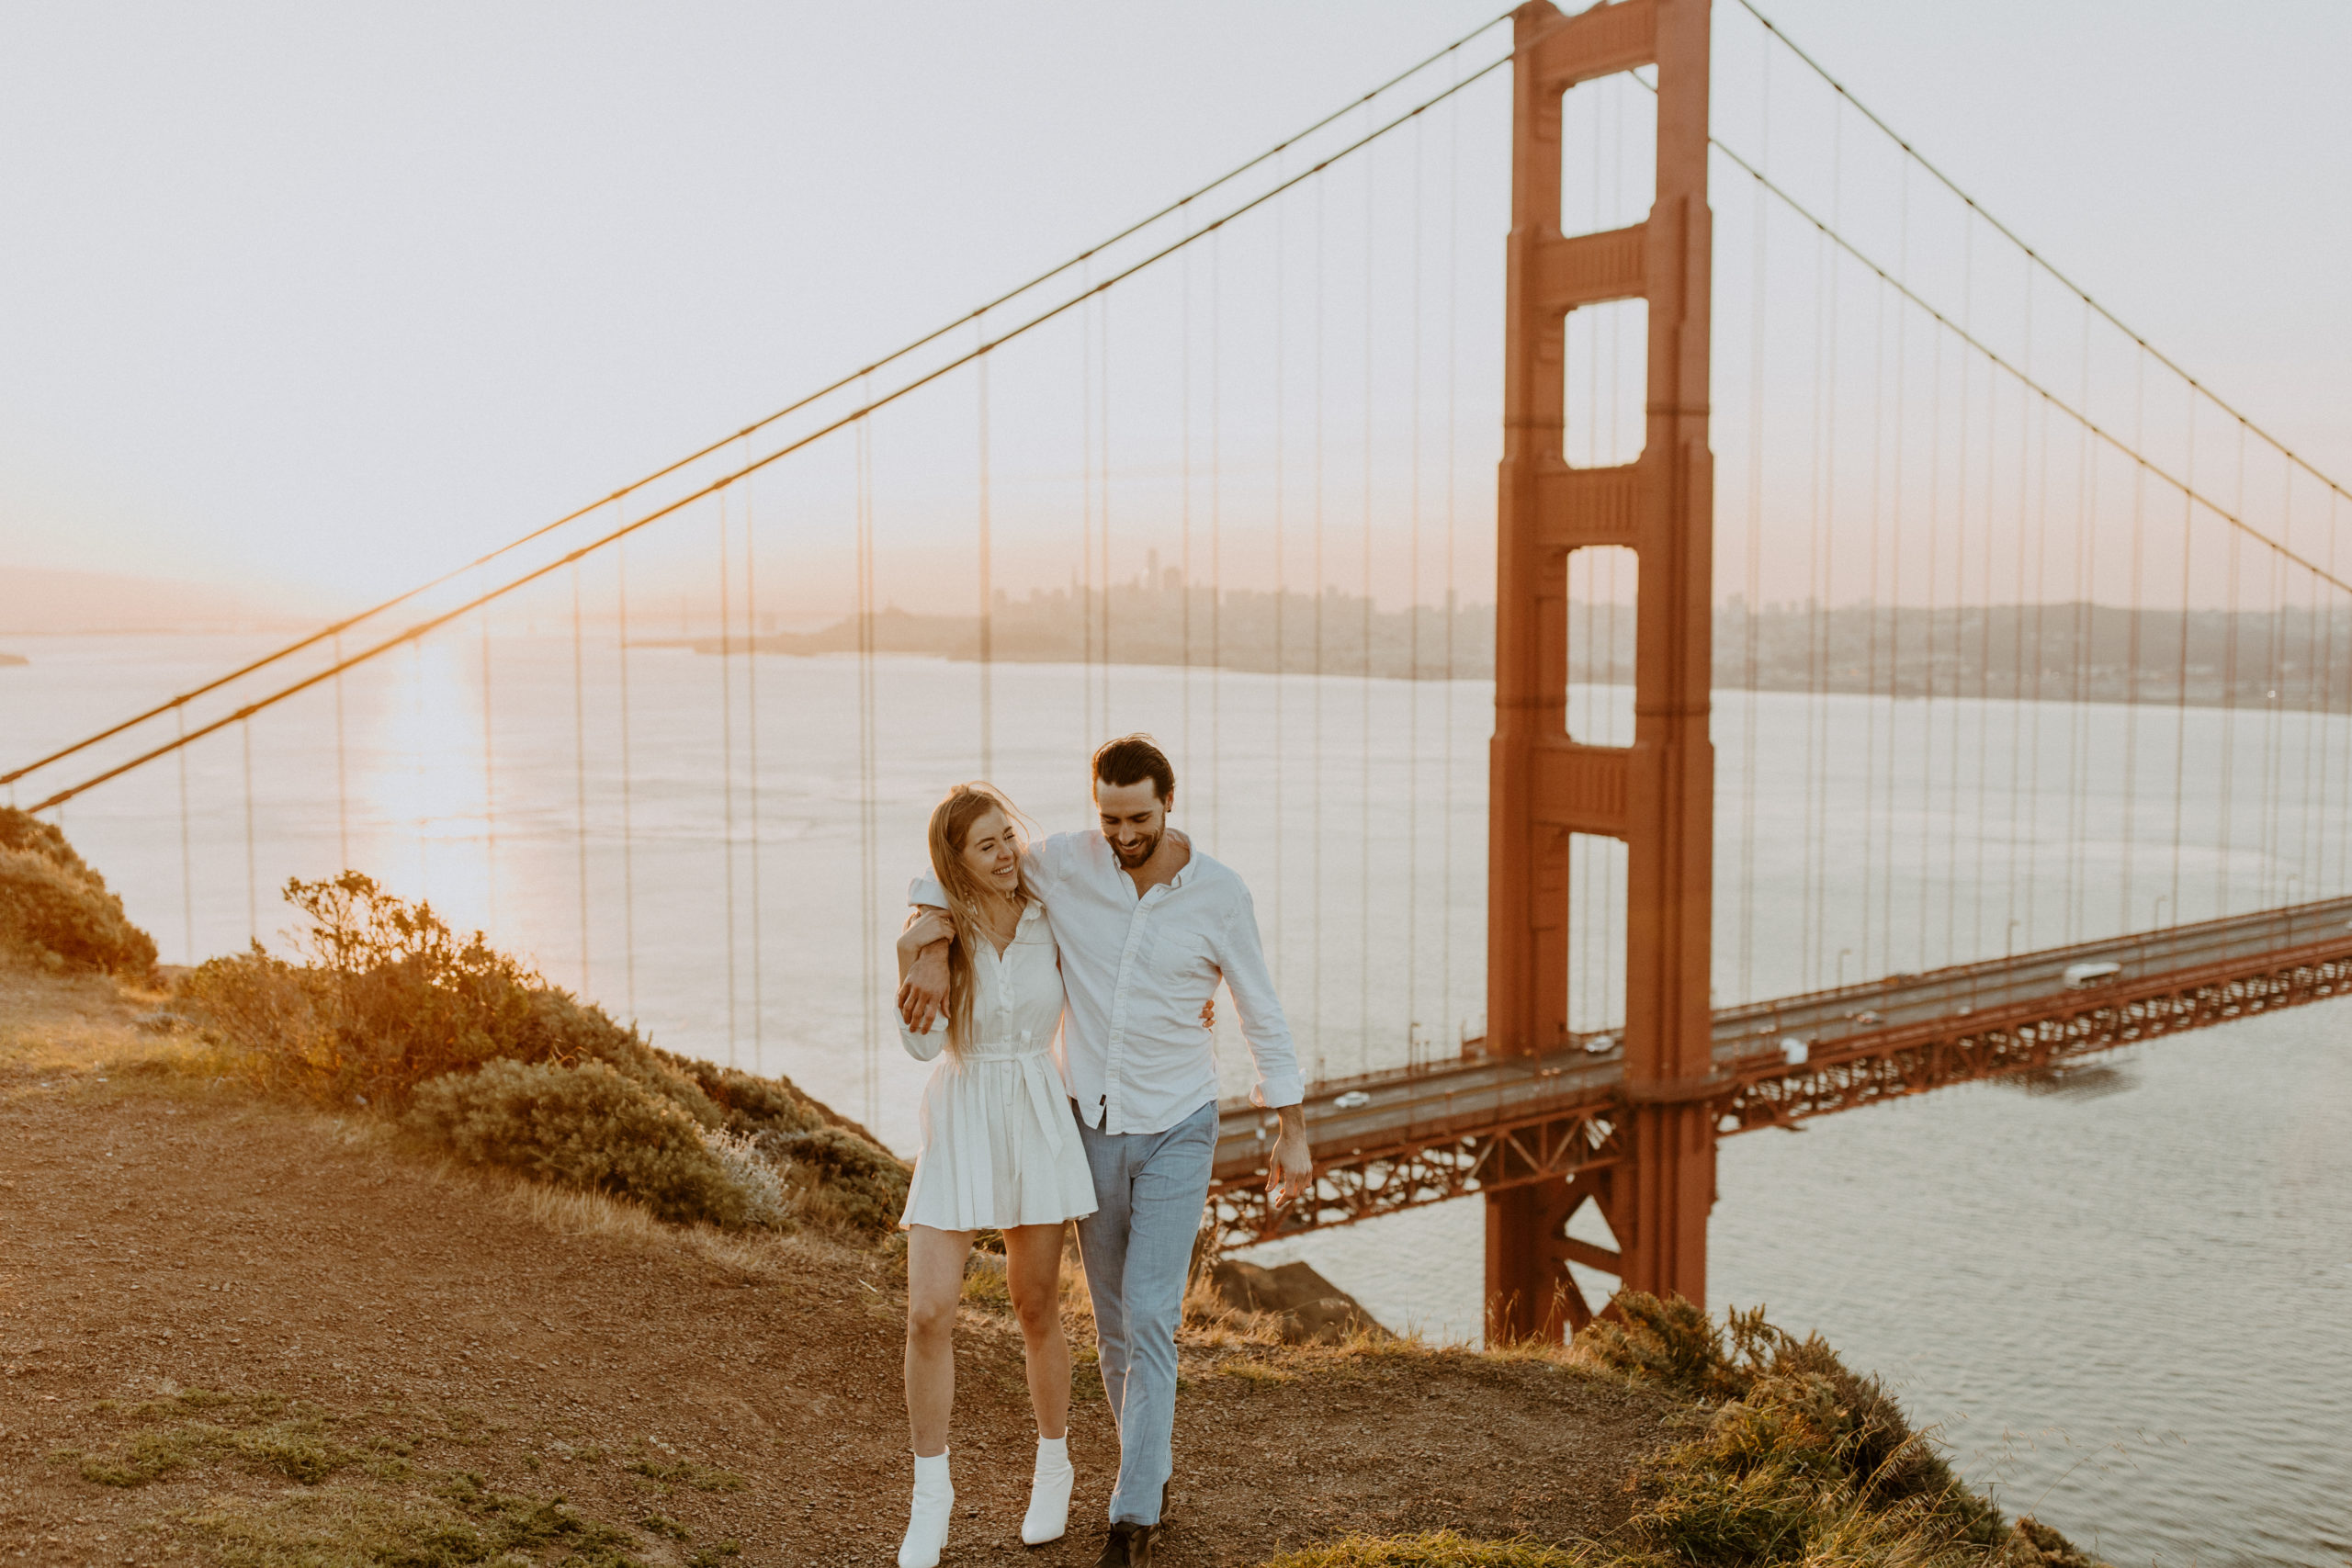 the couple walking away from the Golden Gate Bridge